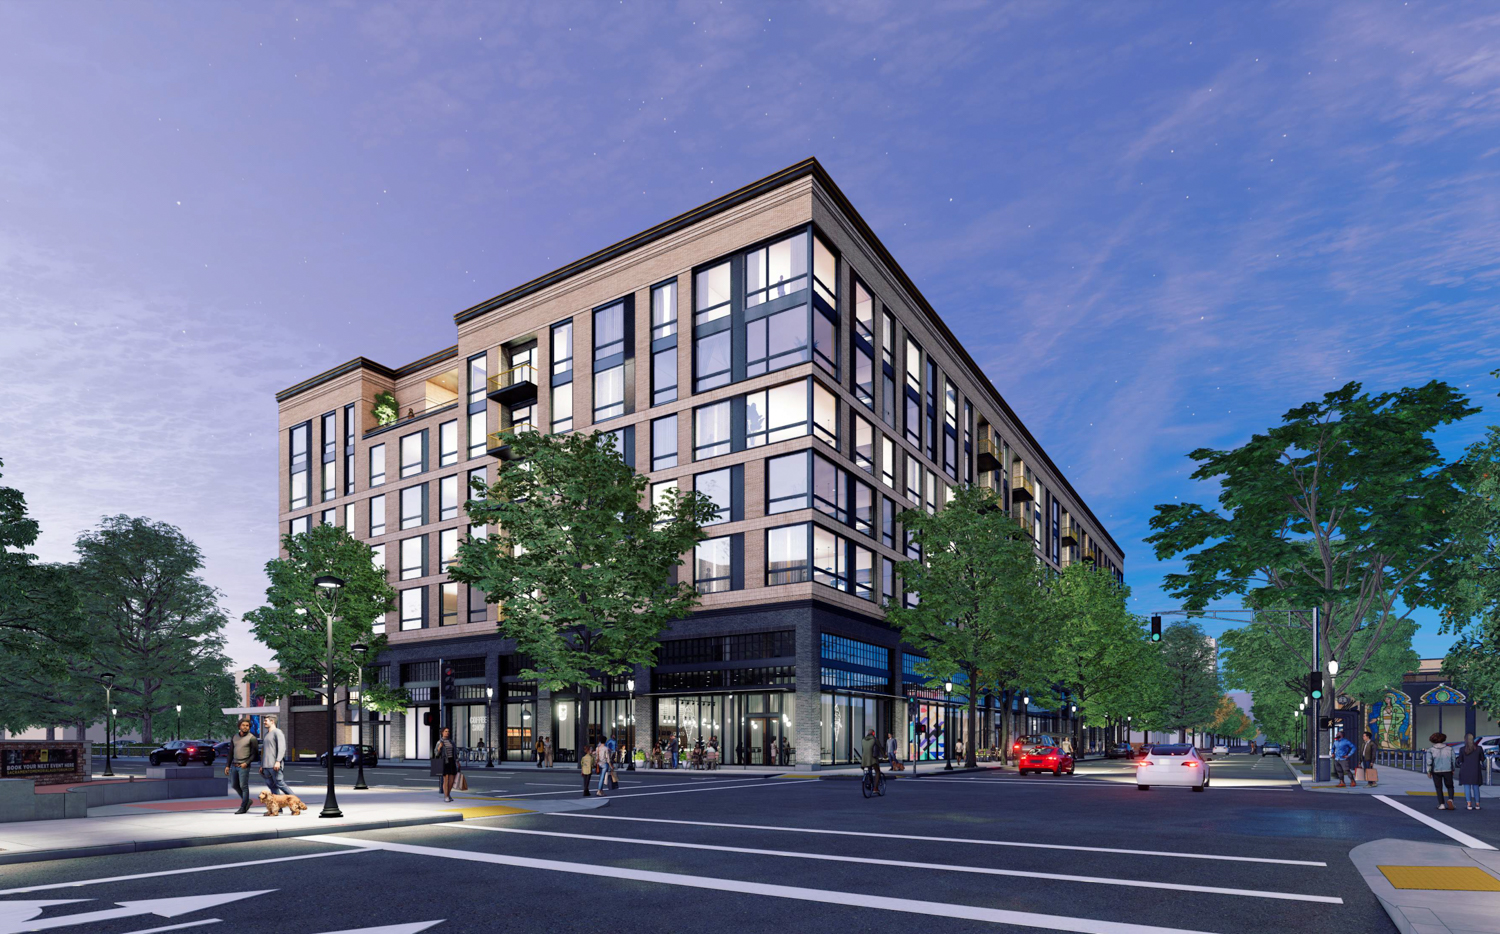 16th and J Street evening view, rendering by C2K Architecture